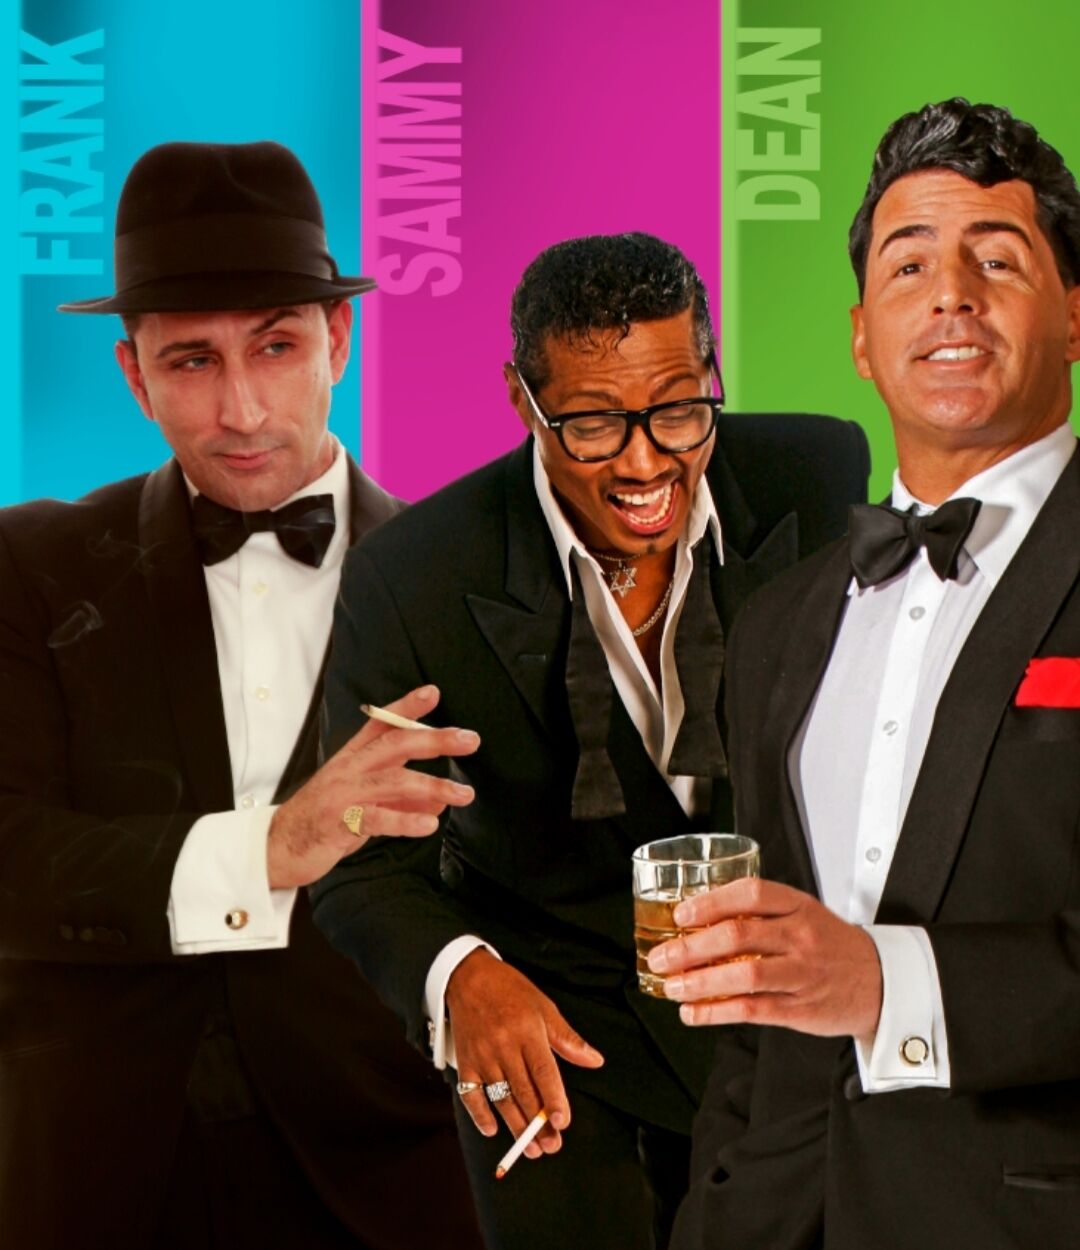 who was in the rat pack